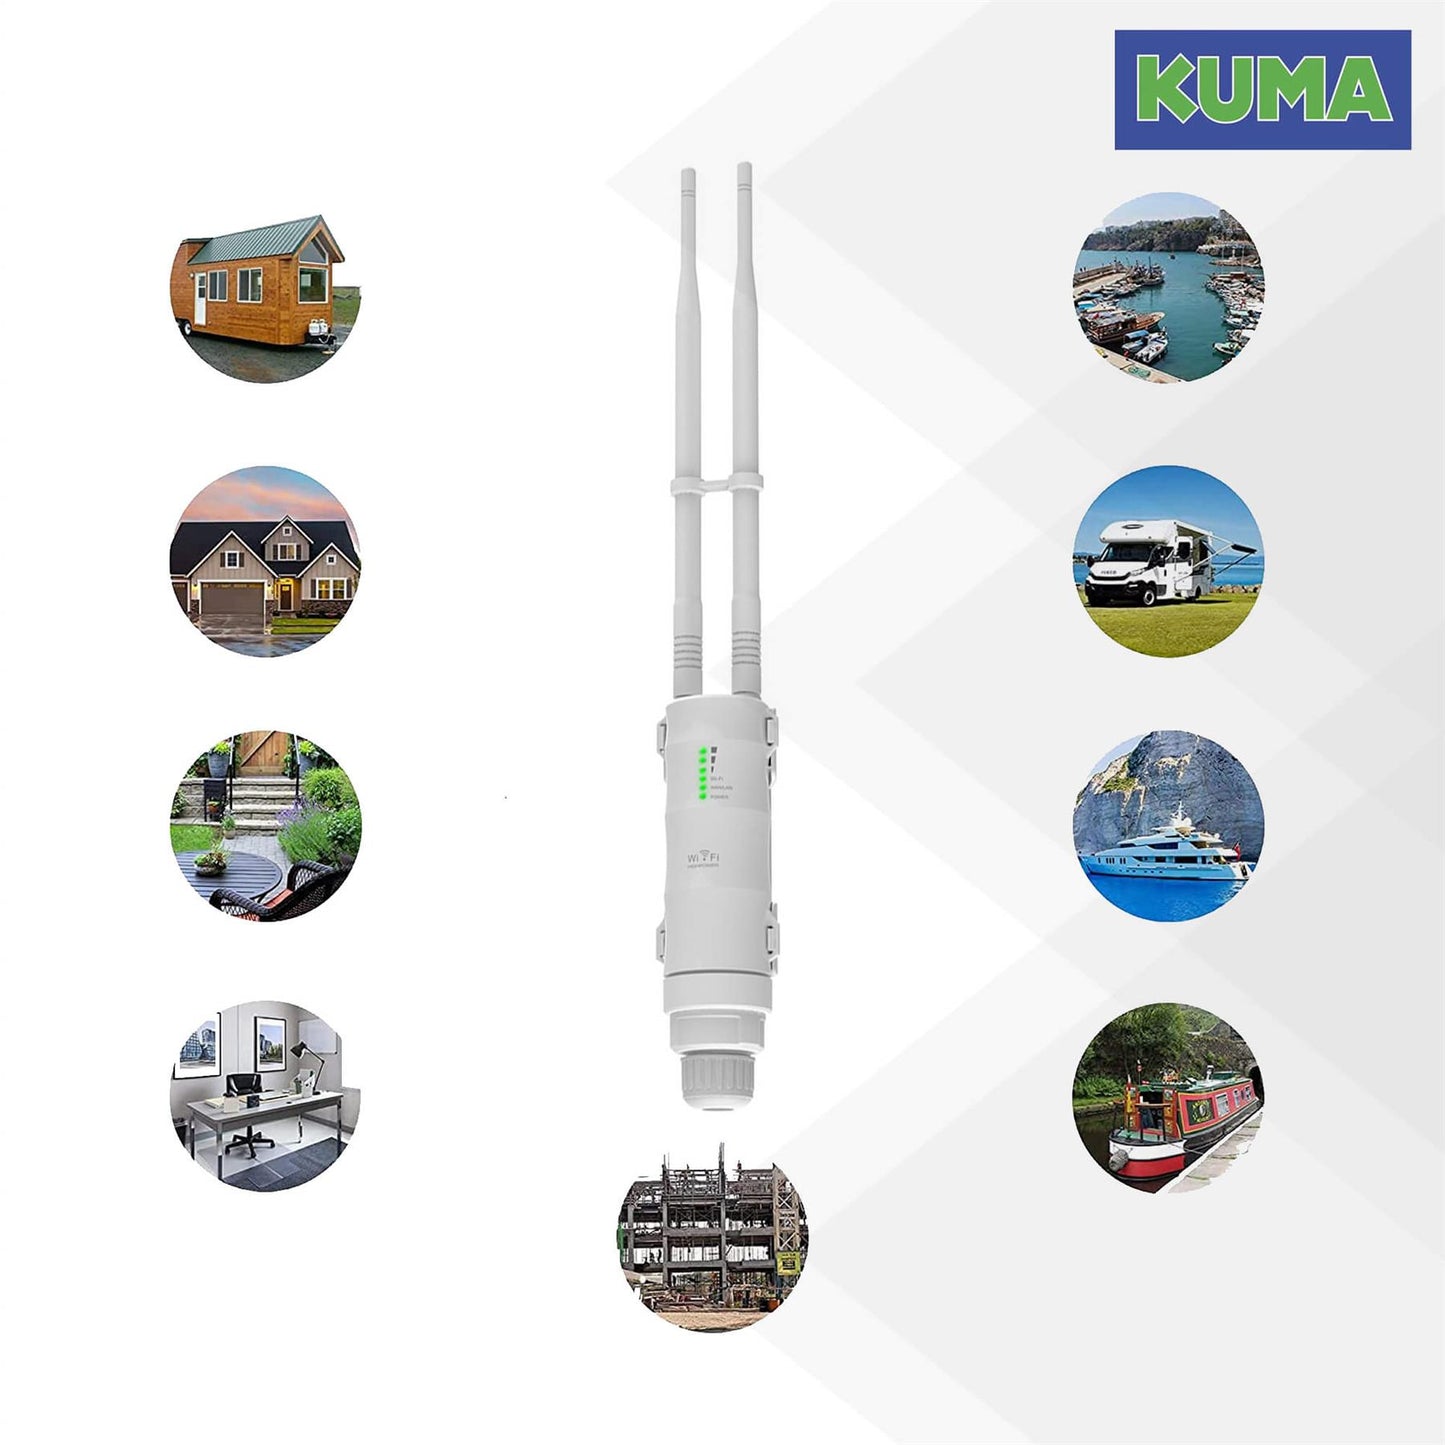 KUMA My-WiFi Hotspot Booster Kit - 5G Dual Band 2.4GHz + 5GHz Wi-Fi Signal Extender Built-in Router Antenna for Home Caravan Motorhome Boat Garden Office - Portable Wireless Mobile Internet Repeater